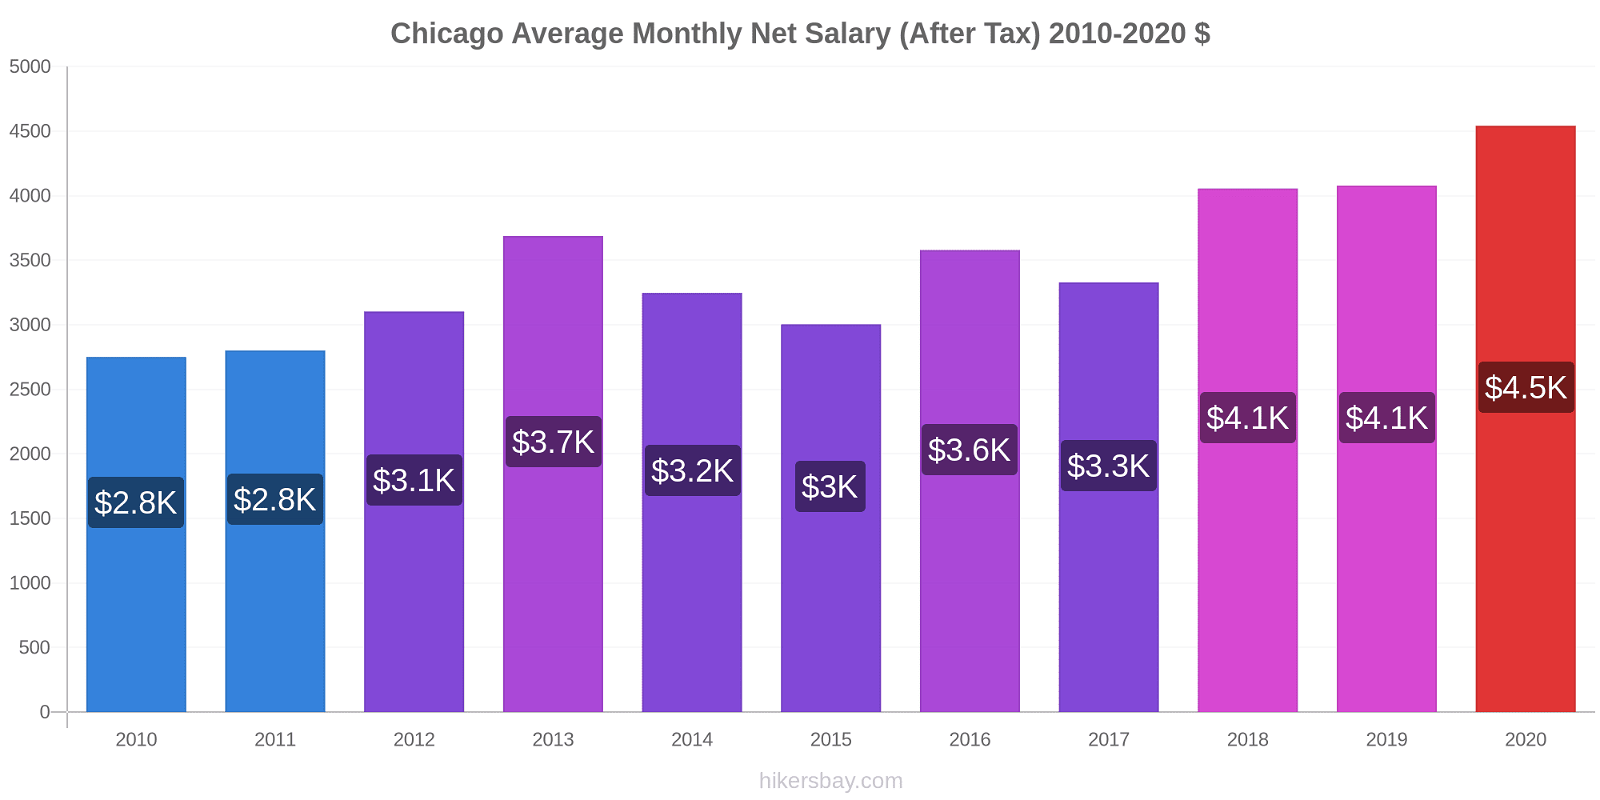 Chicago price changes Average Monthly Net Salary (After Tax) hikersbay.com